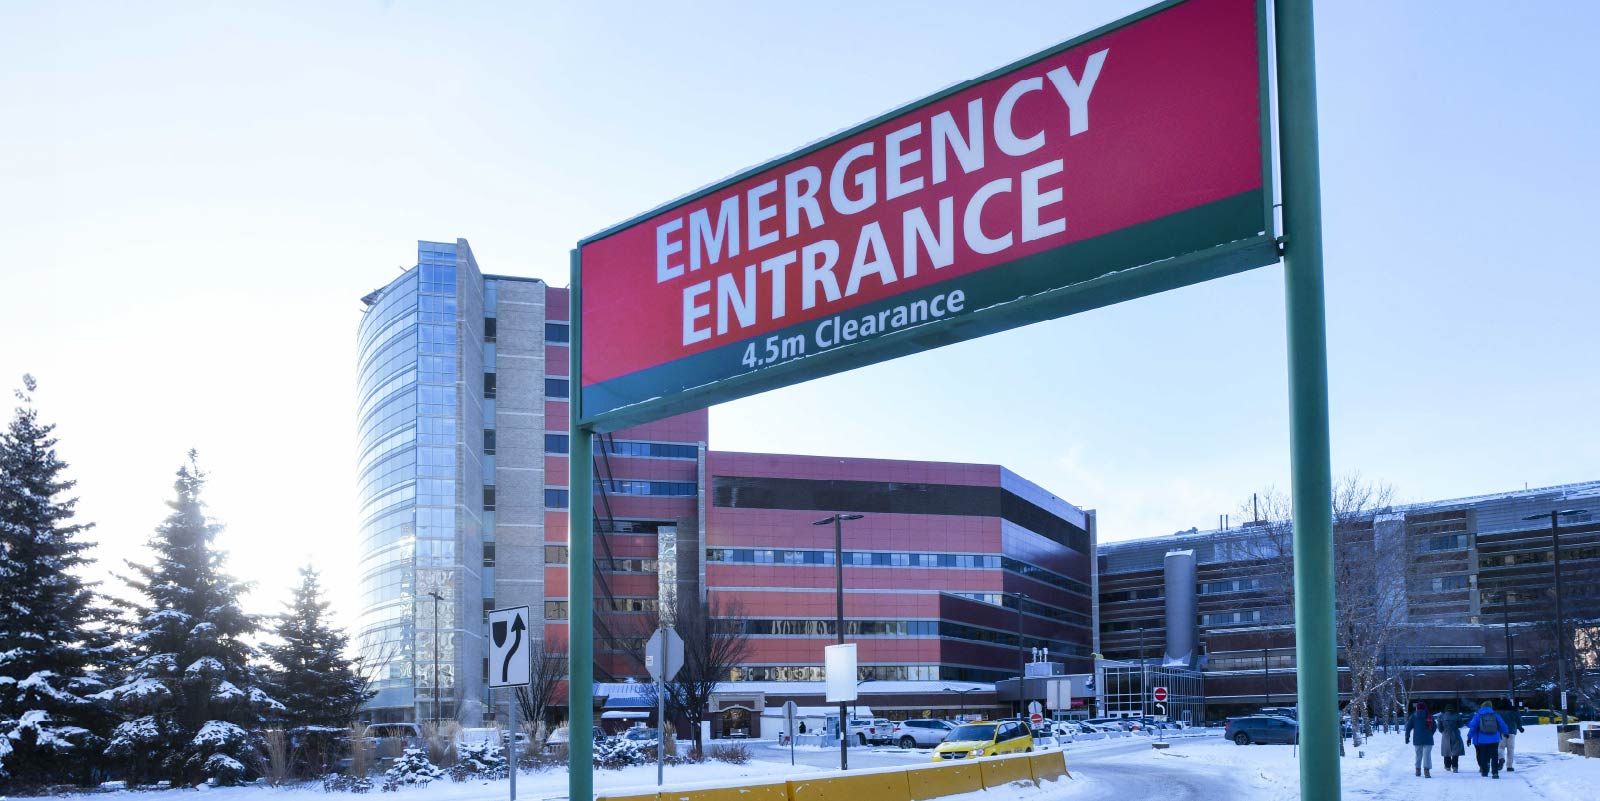 Emergency entrance sign in front of the University of Alberta hospital.